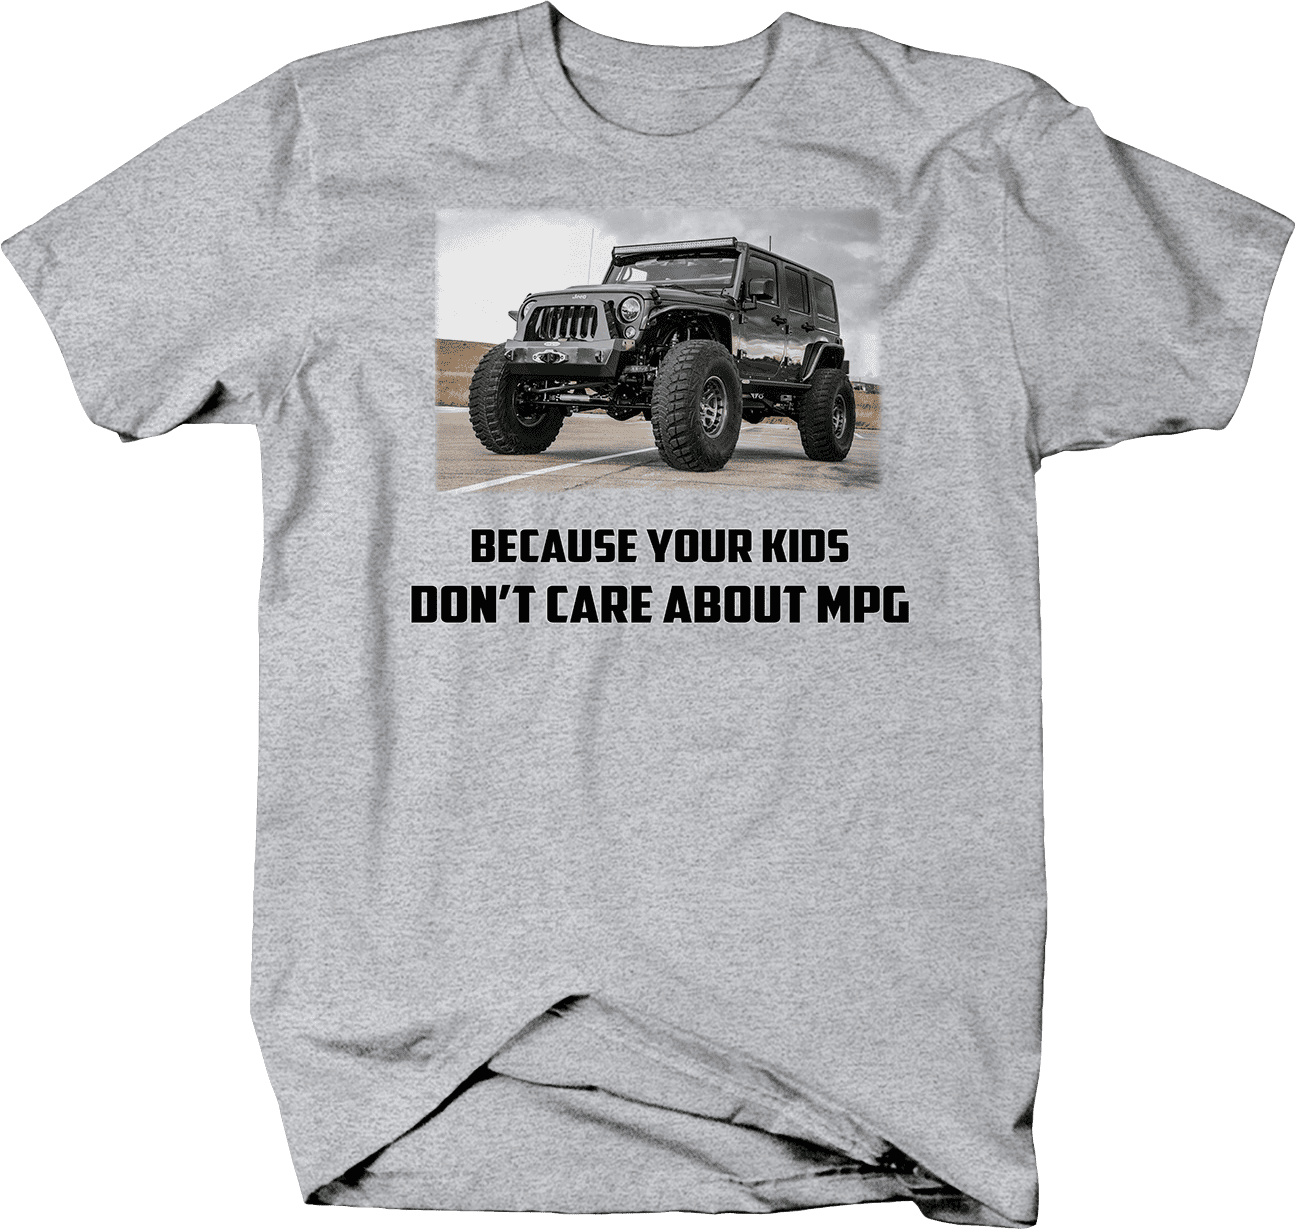 Kids Stripes Jeep inspired Printed T-Shirt Personalised Classic 4X4 Offroad Car 